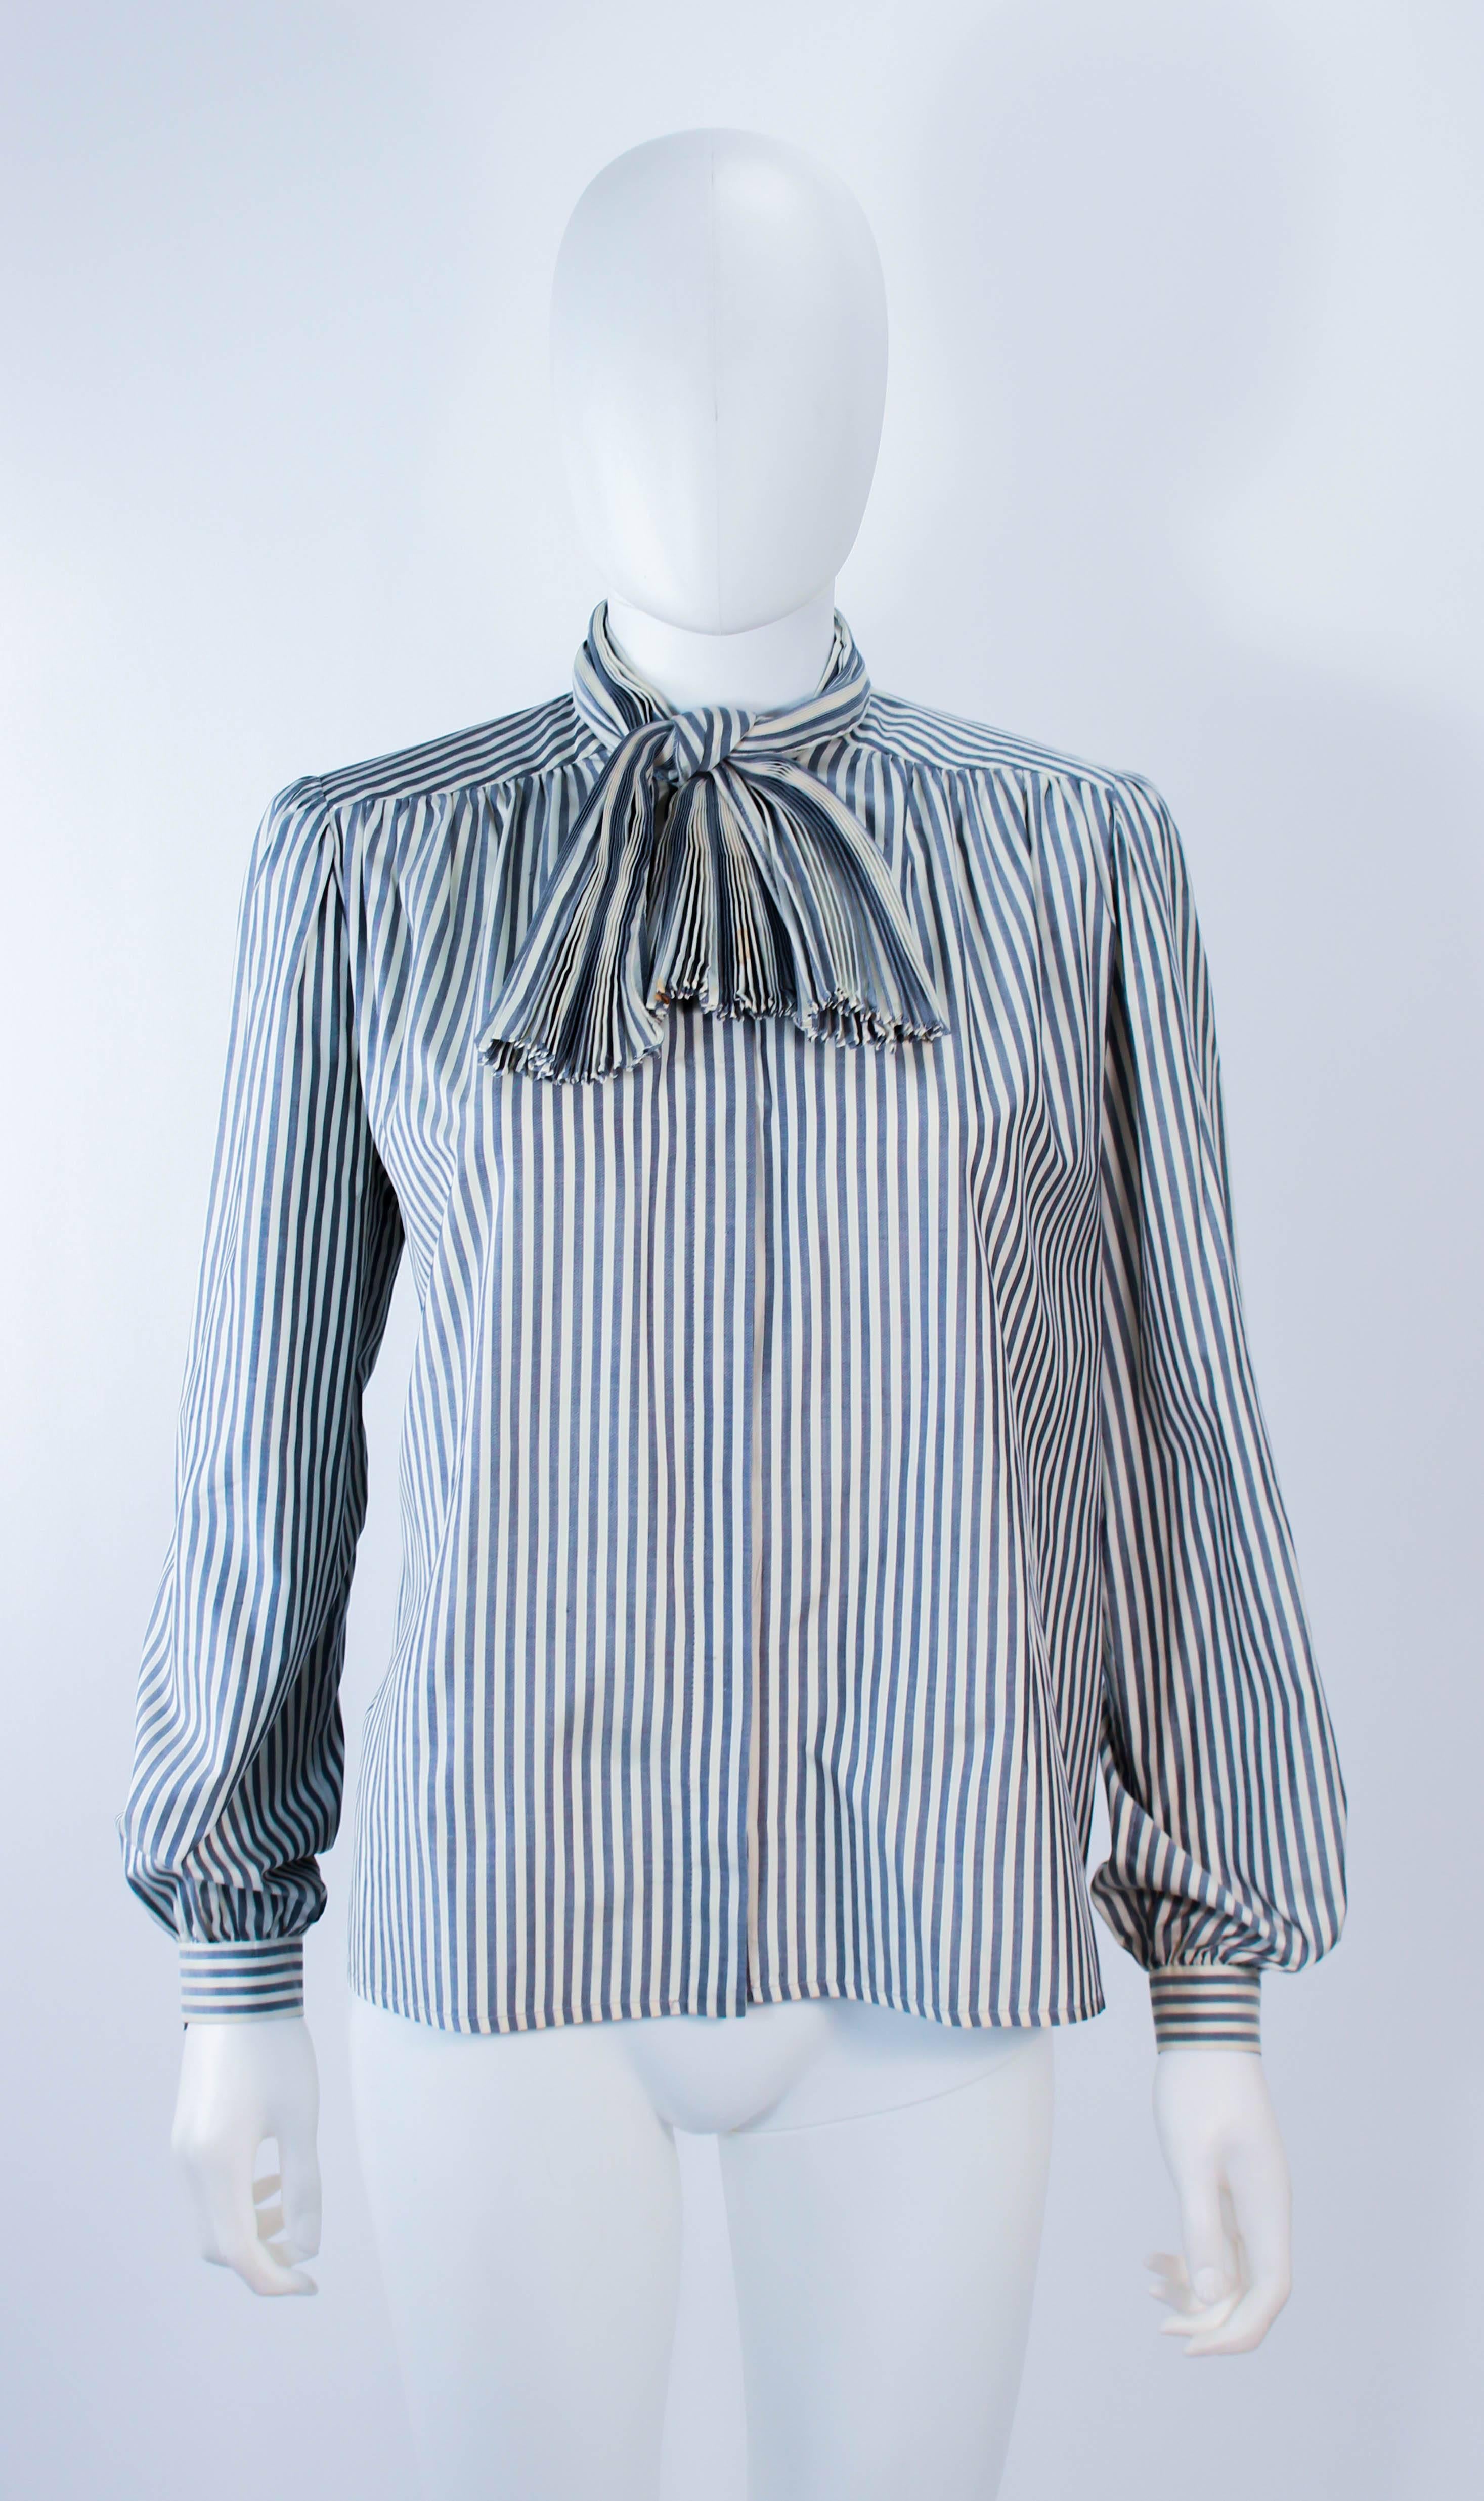 This vintage Valentino blouse is composed of a blue and white pinstripe fabric. Features a pleated pussy bow detail with center front button closures. In good vintage condition, the bow has some staining (see photos) excellent for design